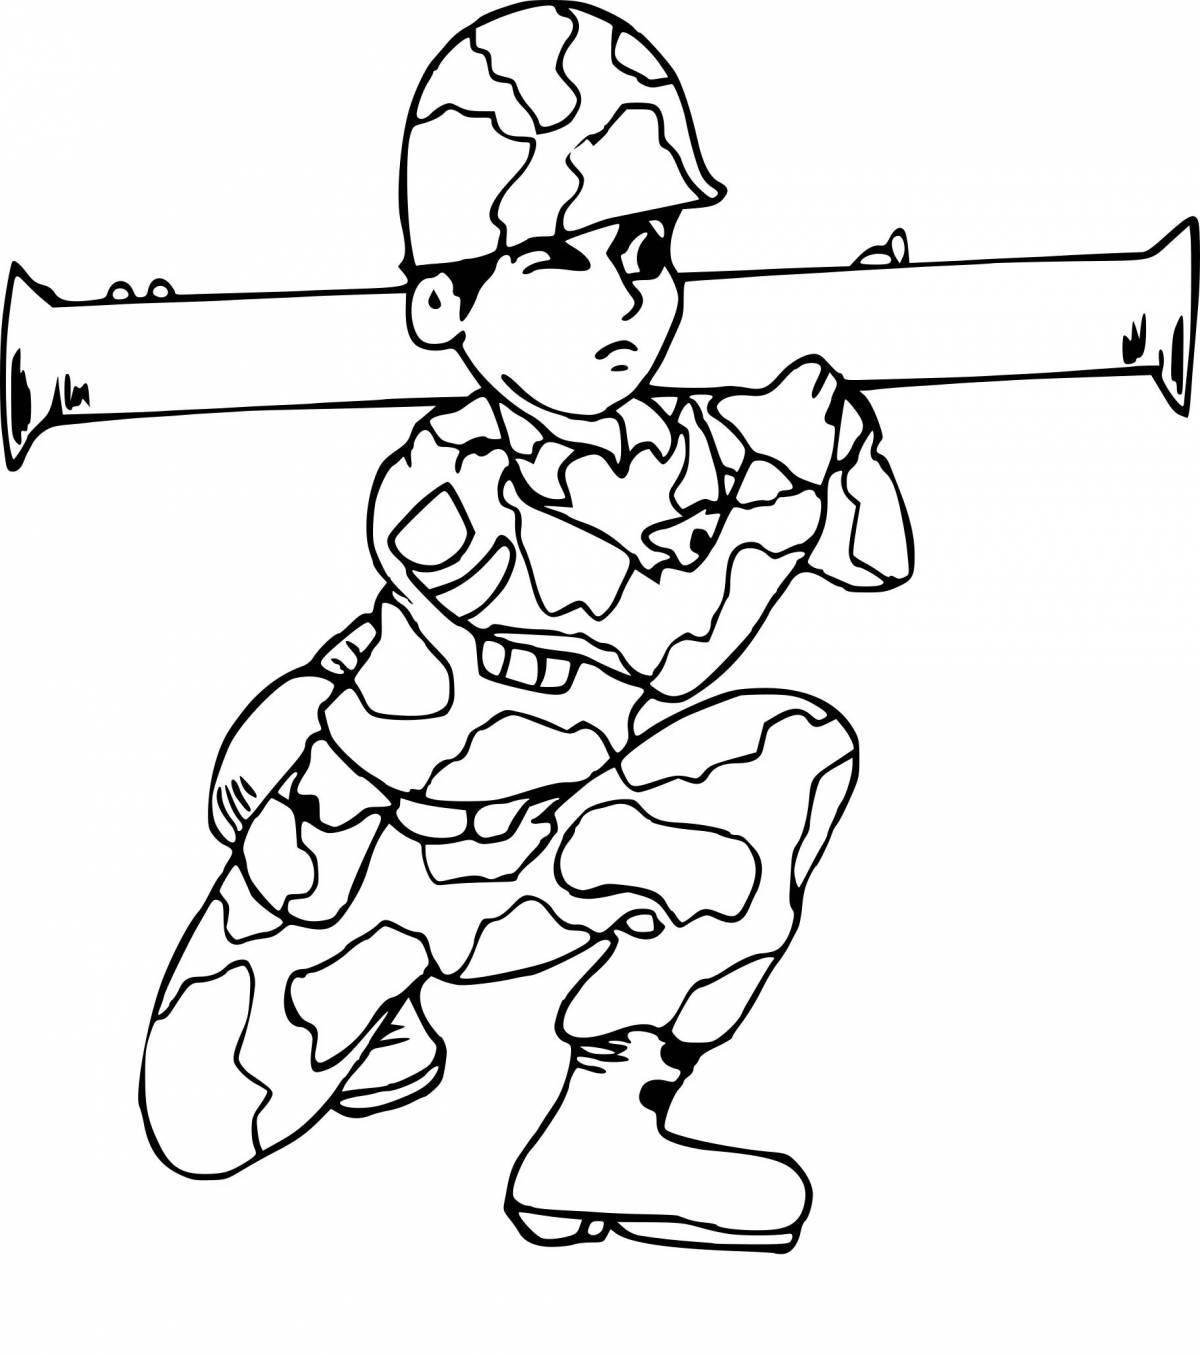 Bright infantry coloring book for kids